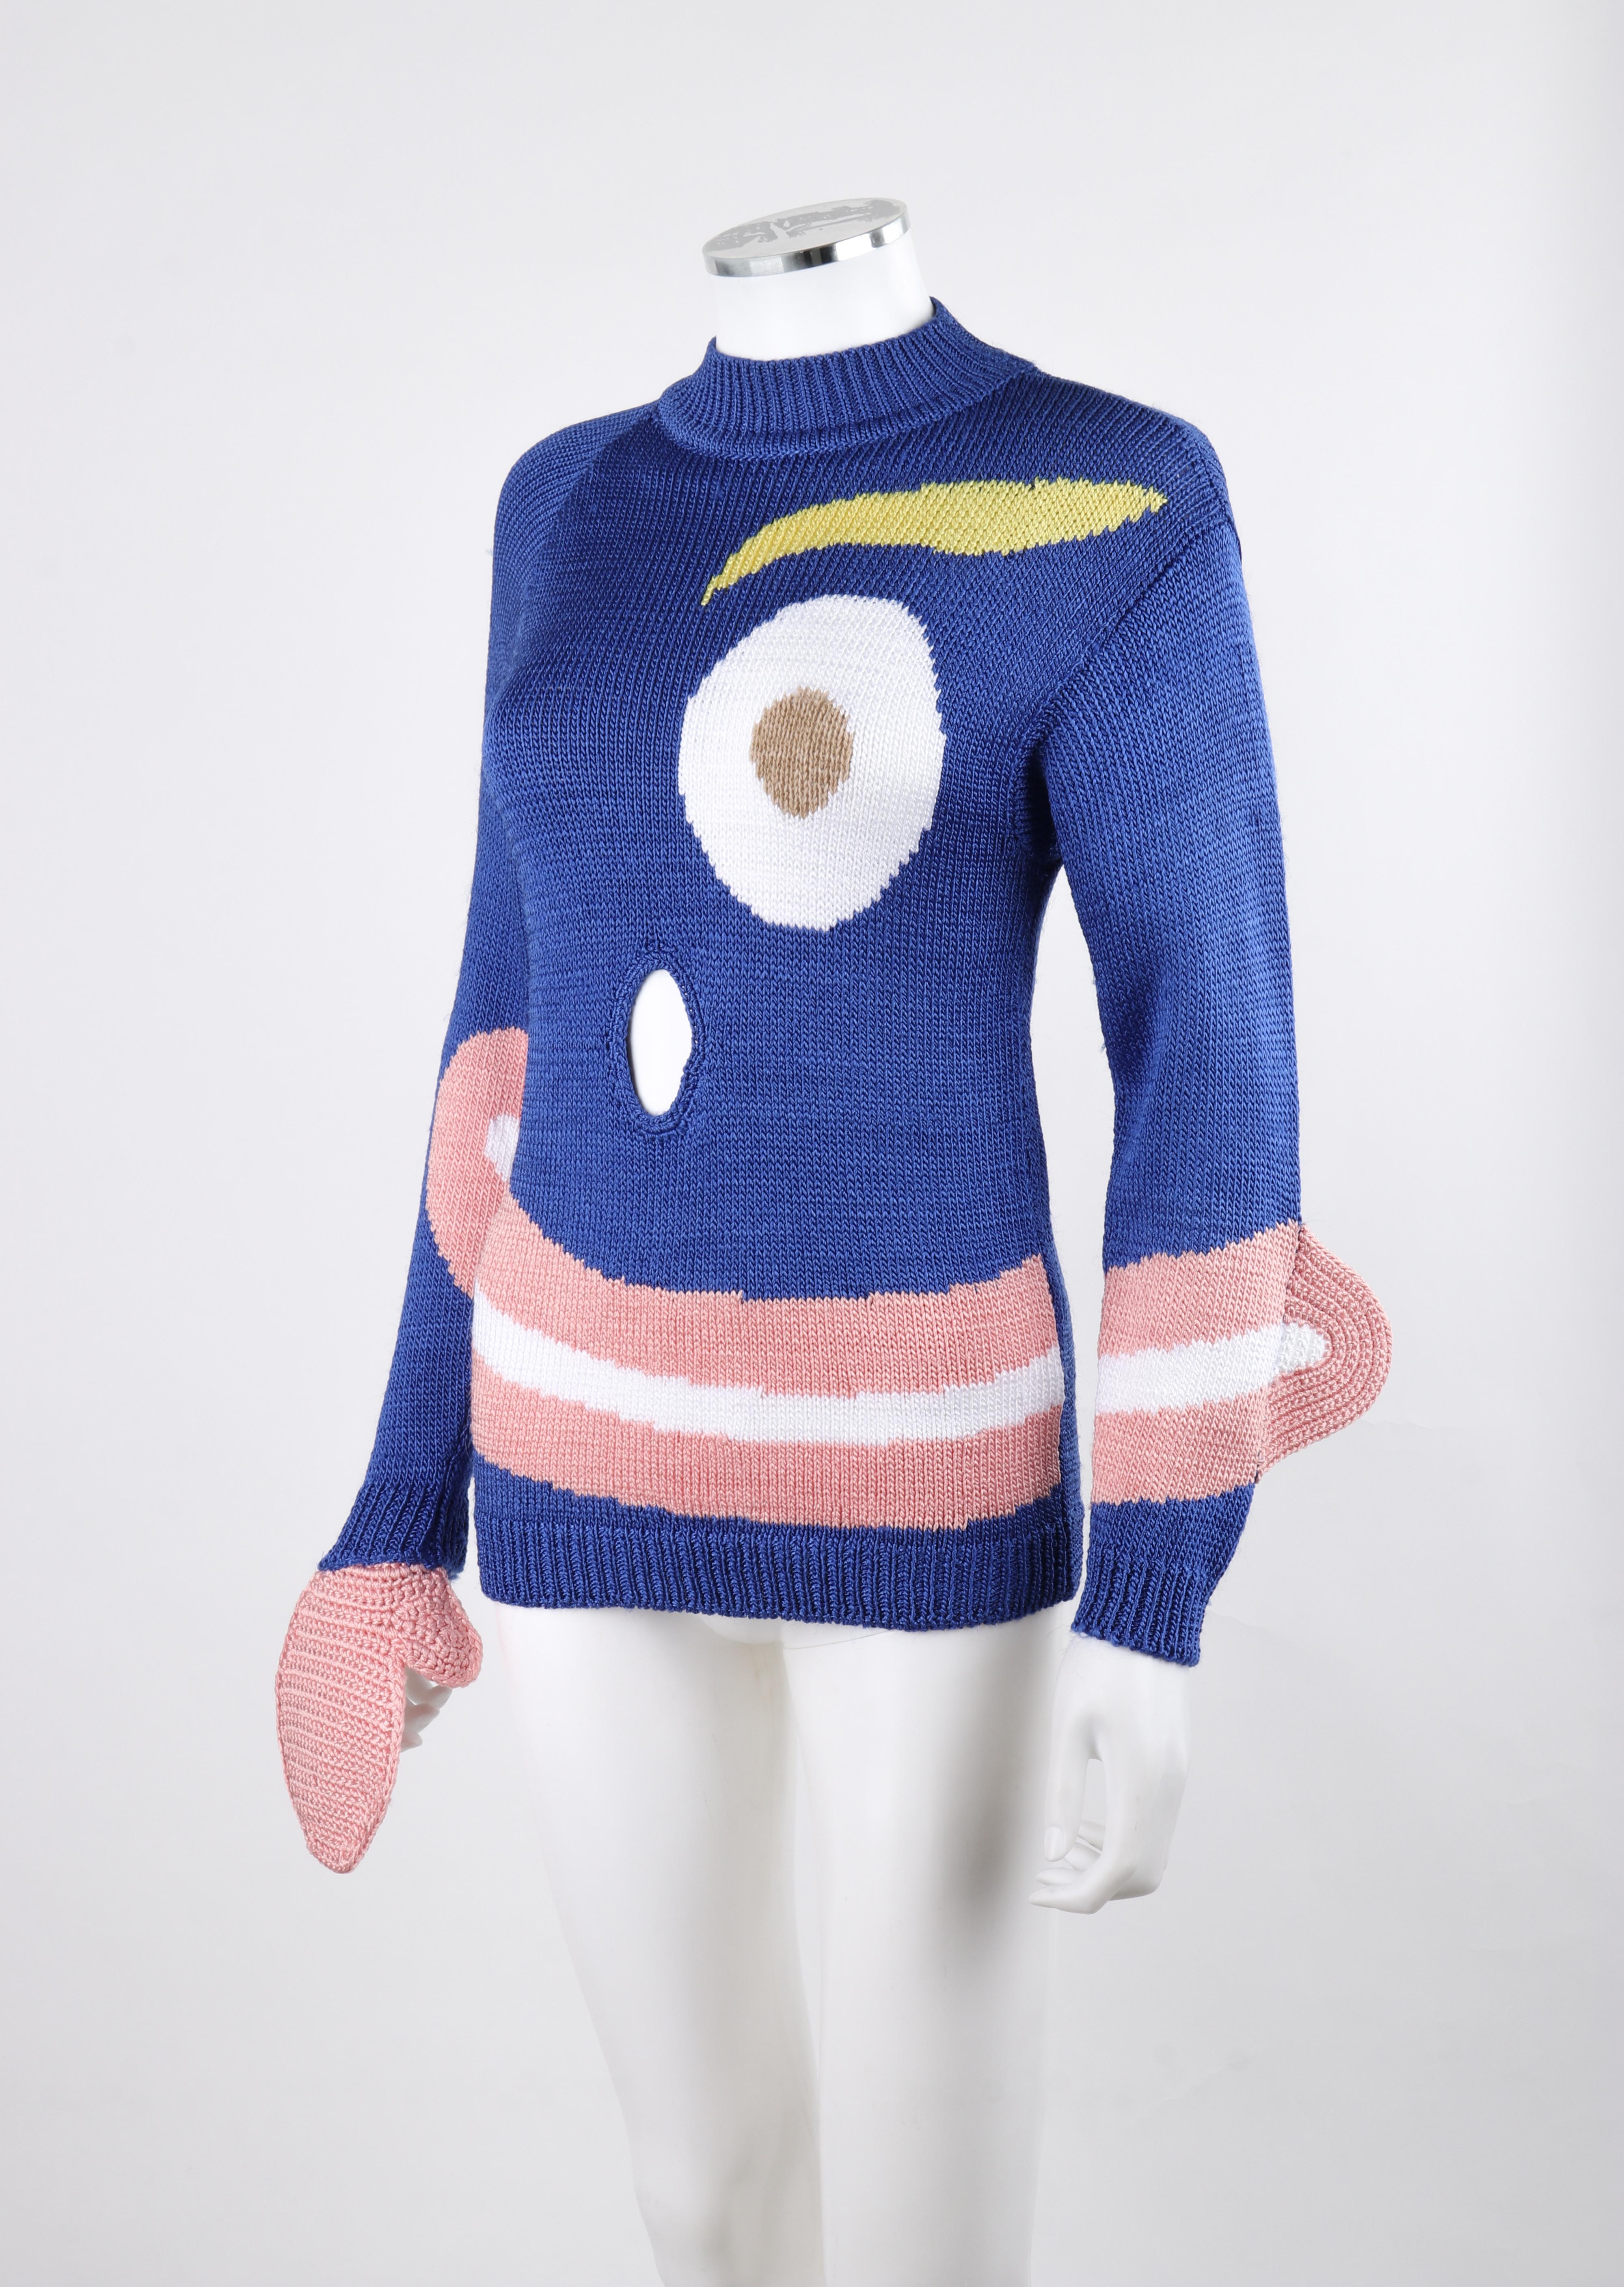 SURVIVAL OF THE FASHIONEST F/S 2020 Blauer Strick Pullover mit smiley Face Pullover Top S im Angebot 5